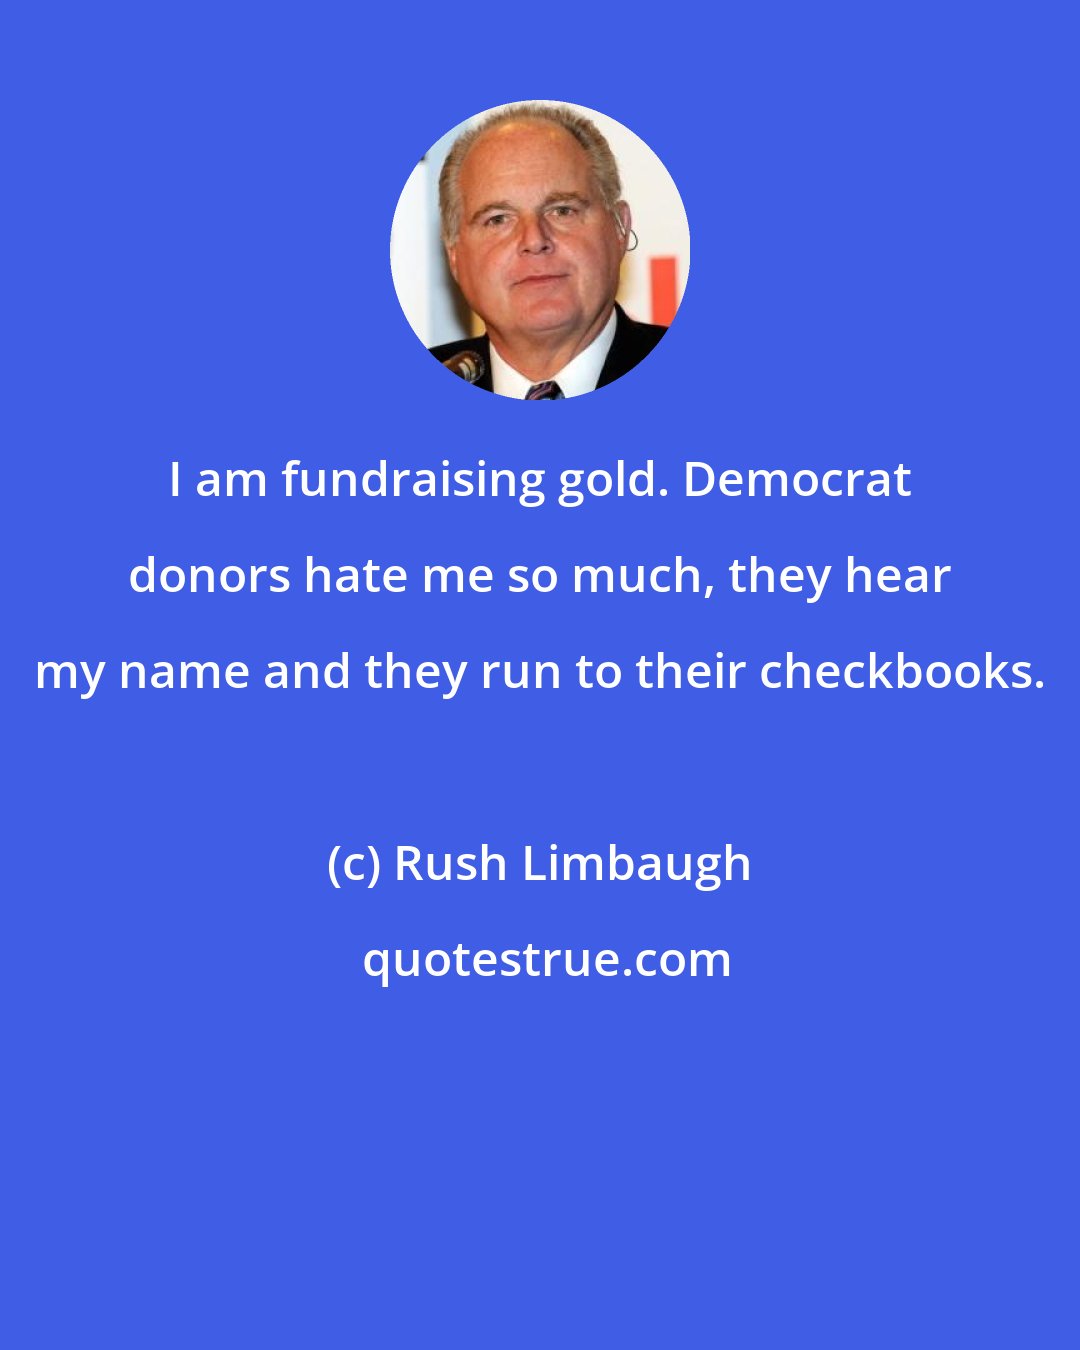 Rush Limbaugh: I am fundraising gold. Democrat donors hate me so much, they hear my name and they run to their checkbooks.